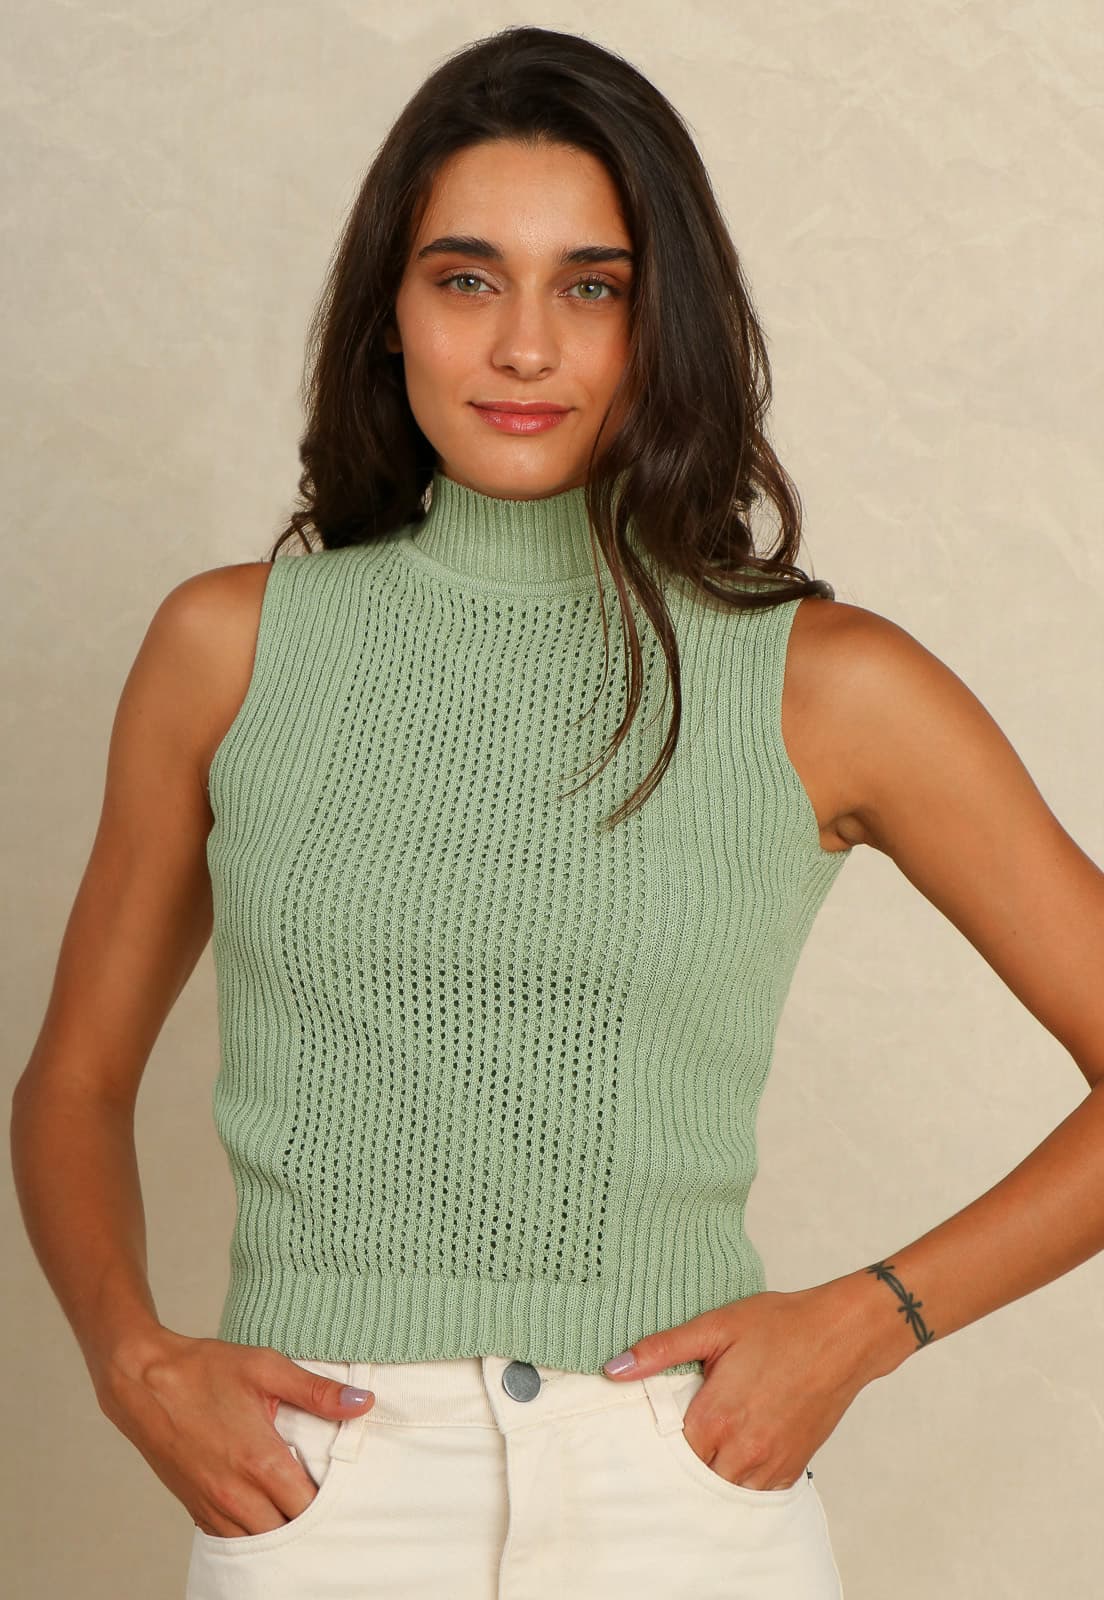 19601-BLUSA-CROPPED-TRICOT-VERDE-MATCHA_1